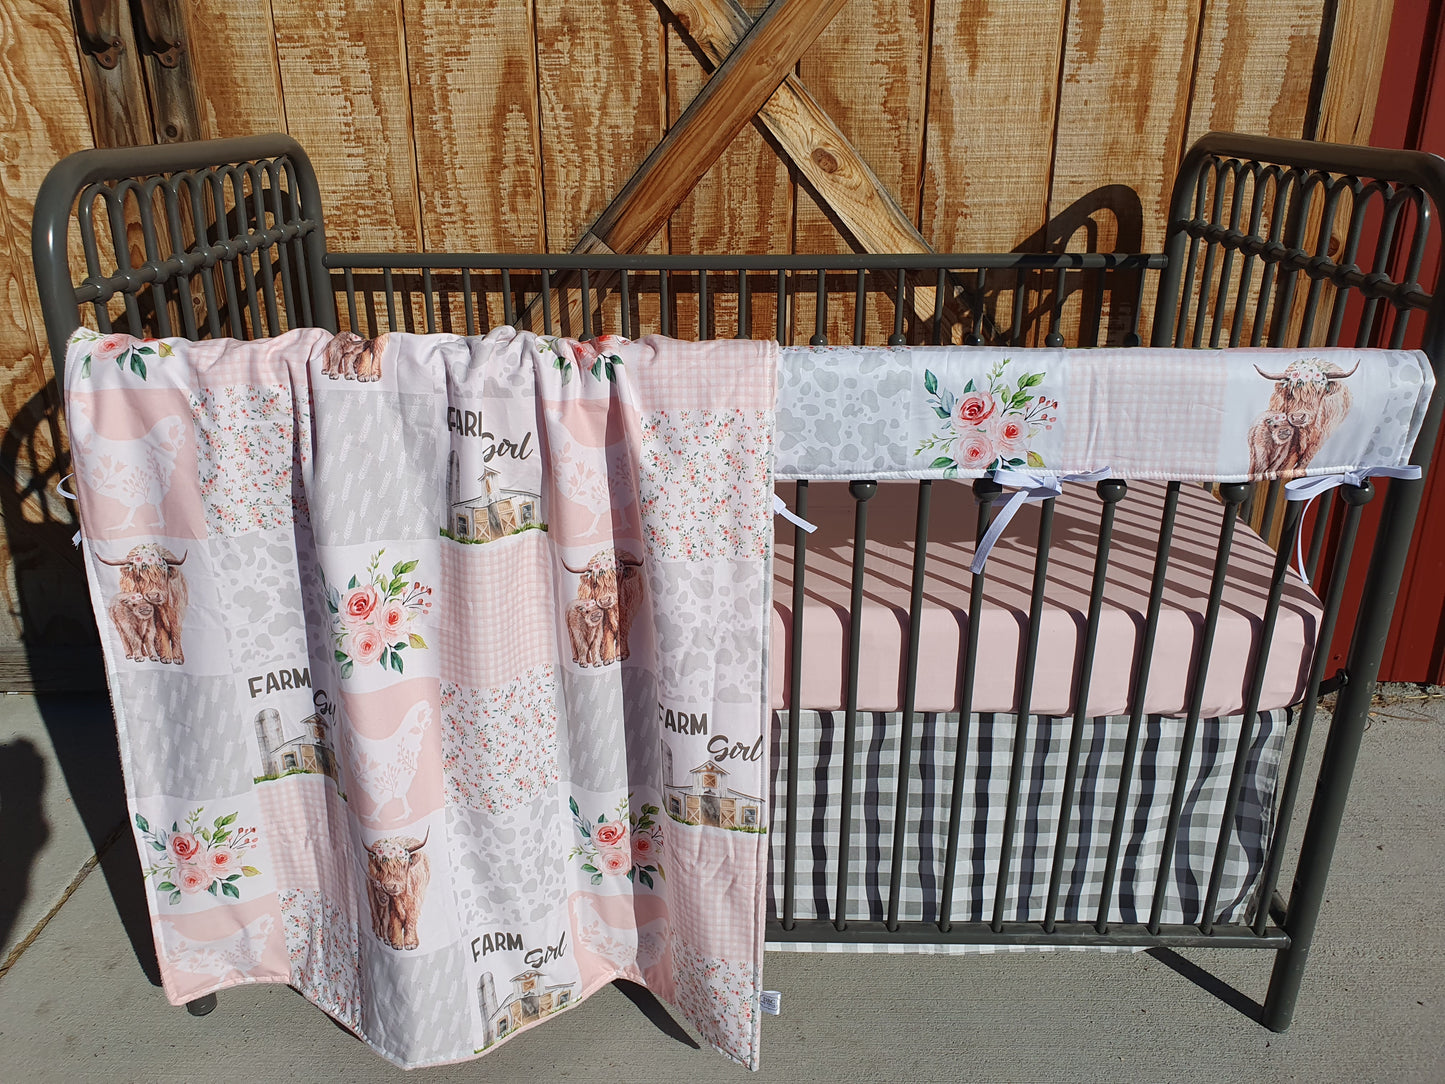 New Release Girl Crib Bedding - Highland Cow Farm Girl in Pink Gray Baby Bedding & Nursery Collection - DBC Baby Bedding Co 